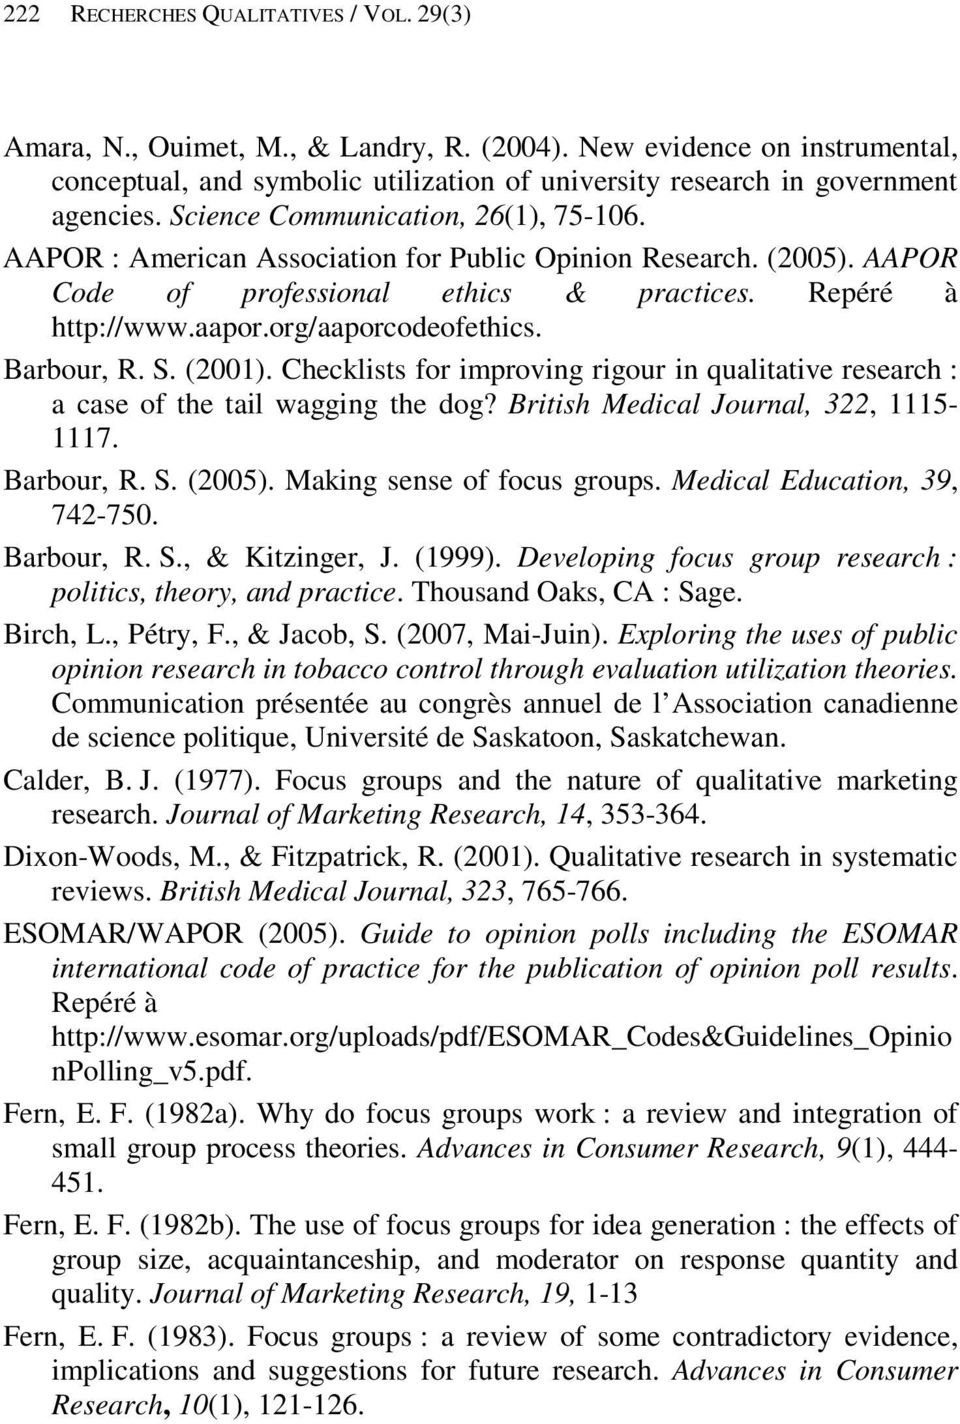 Barbour, R. S. (2001). Checklists for improving rigour in qualitative research : a case of the tail wagging the dog? British Medical Journal, 322, 1115-1117. Barbour, R. S. (2005).